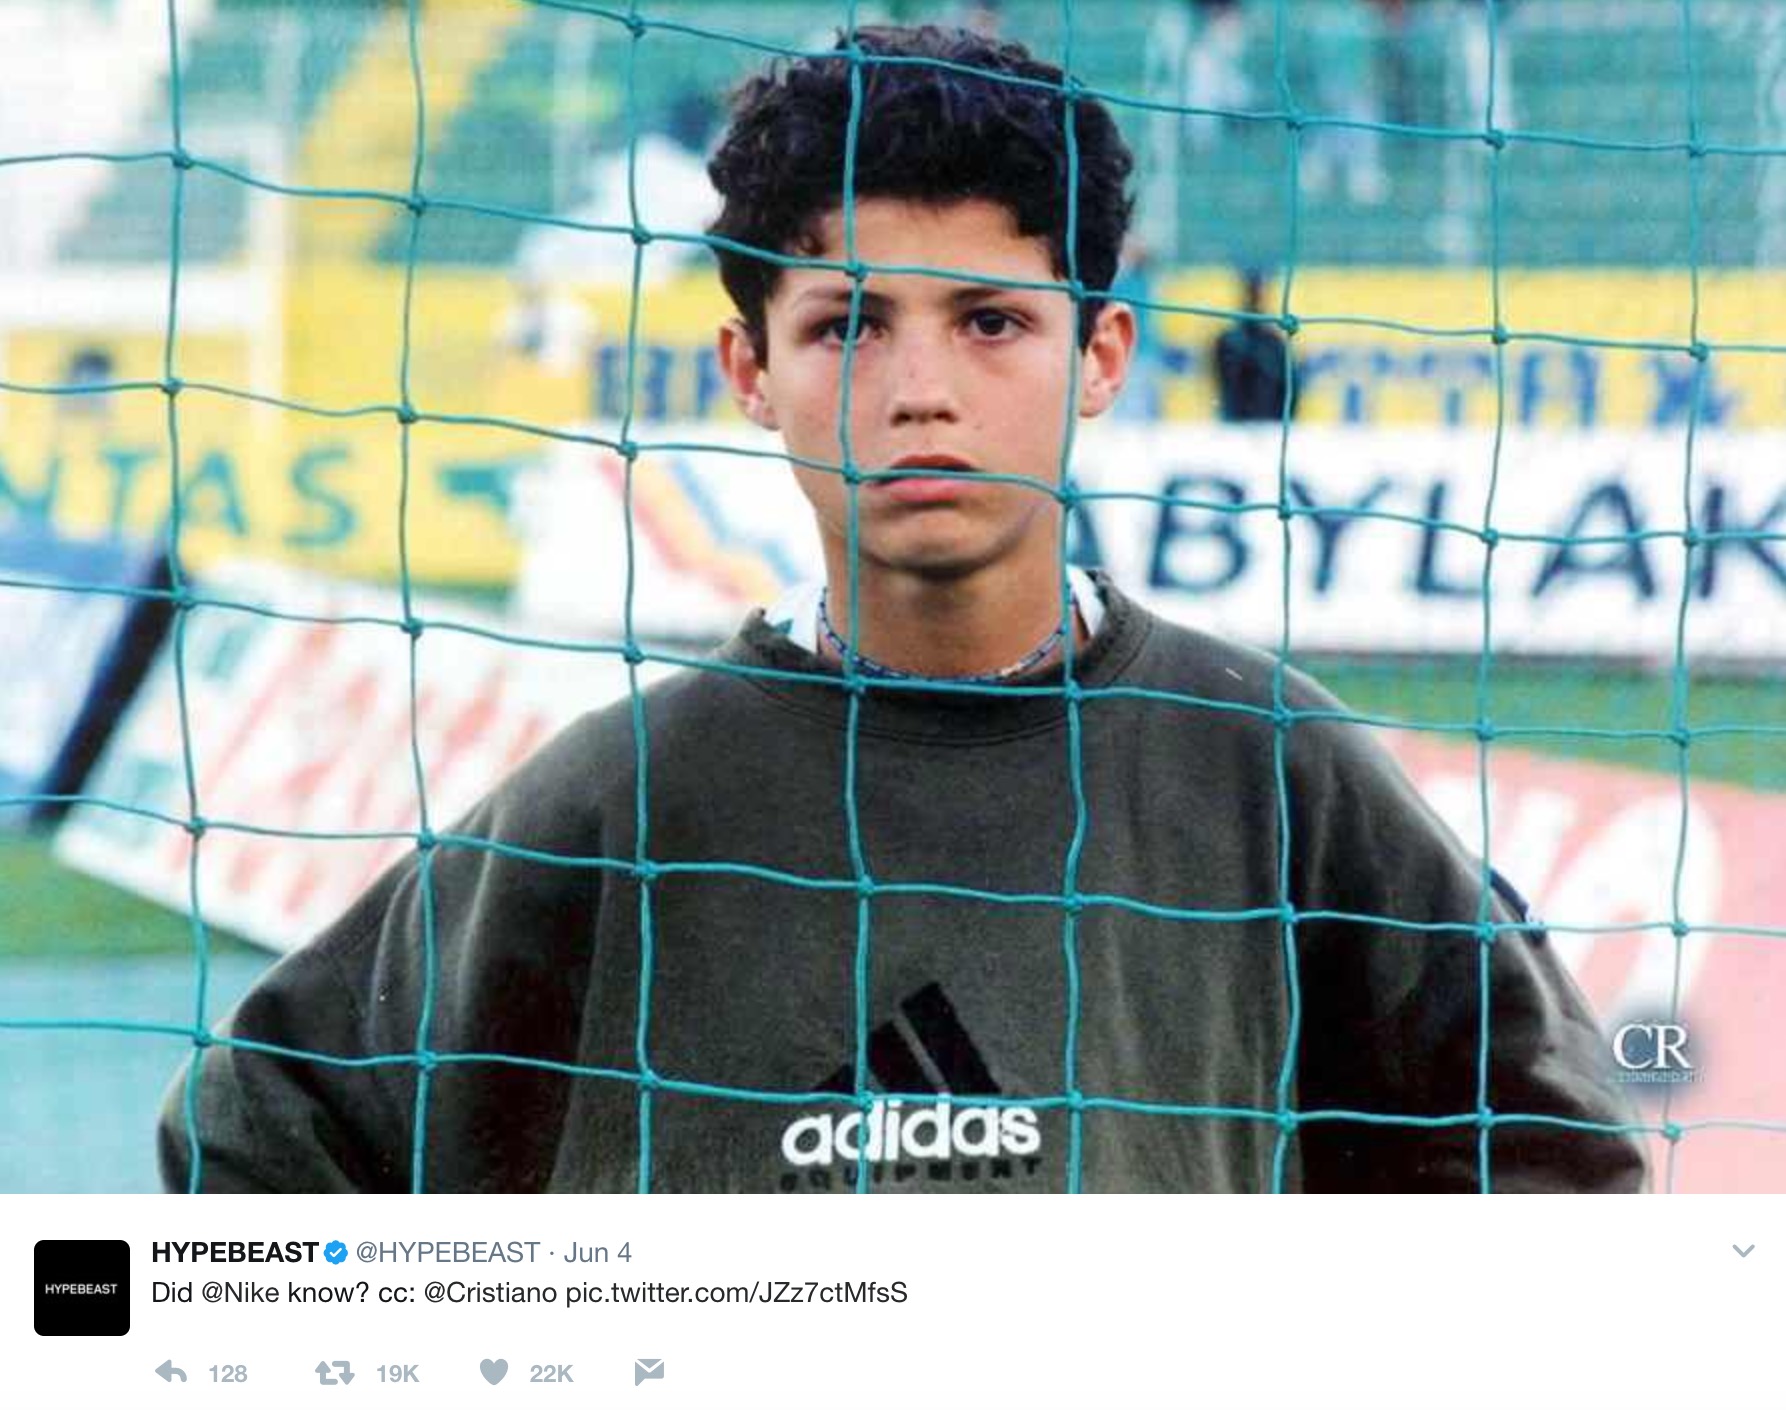 Nike Thought It Could Get Away With Image Of Young Cristiano Ronaldo Wearing Adidas In Ad For The Win